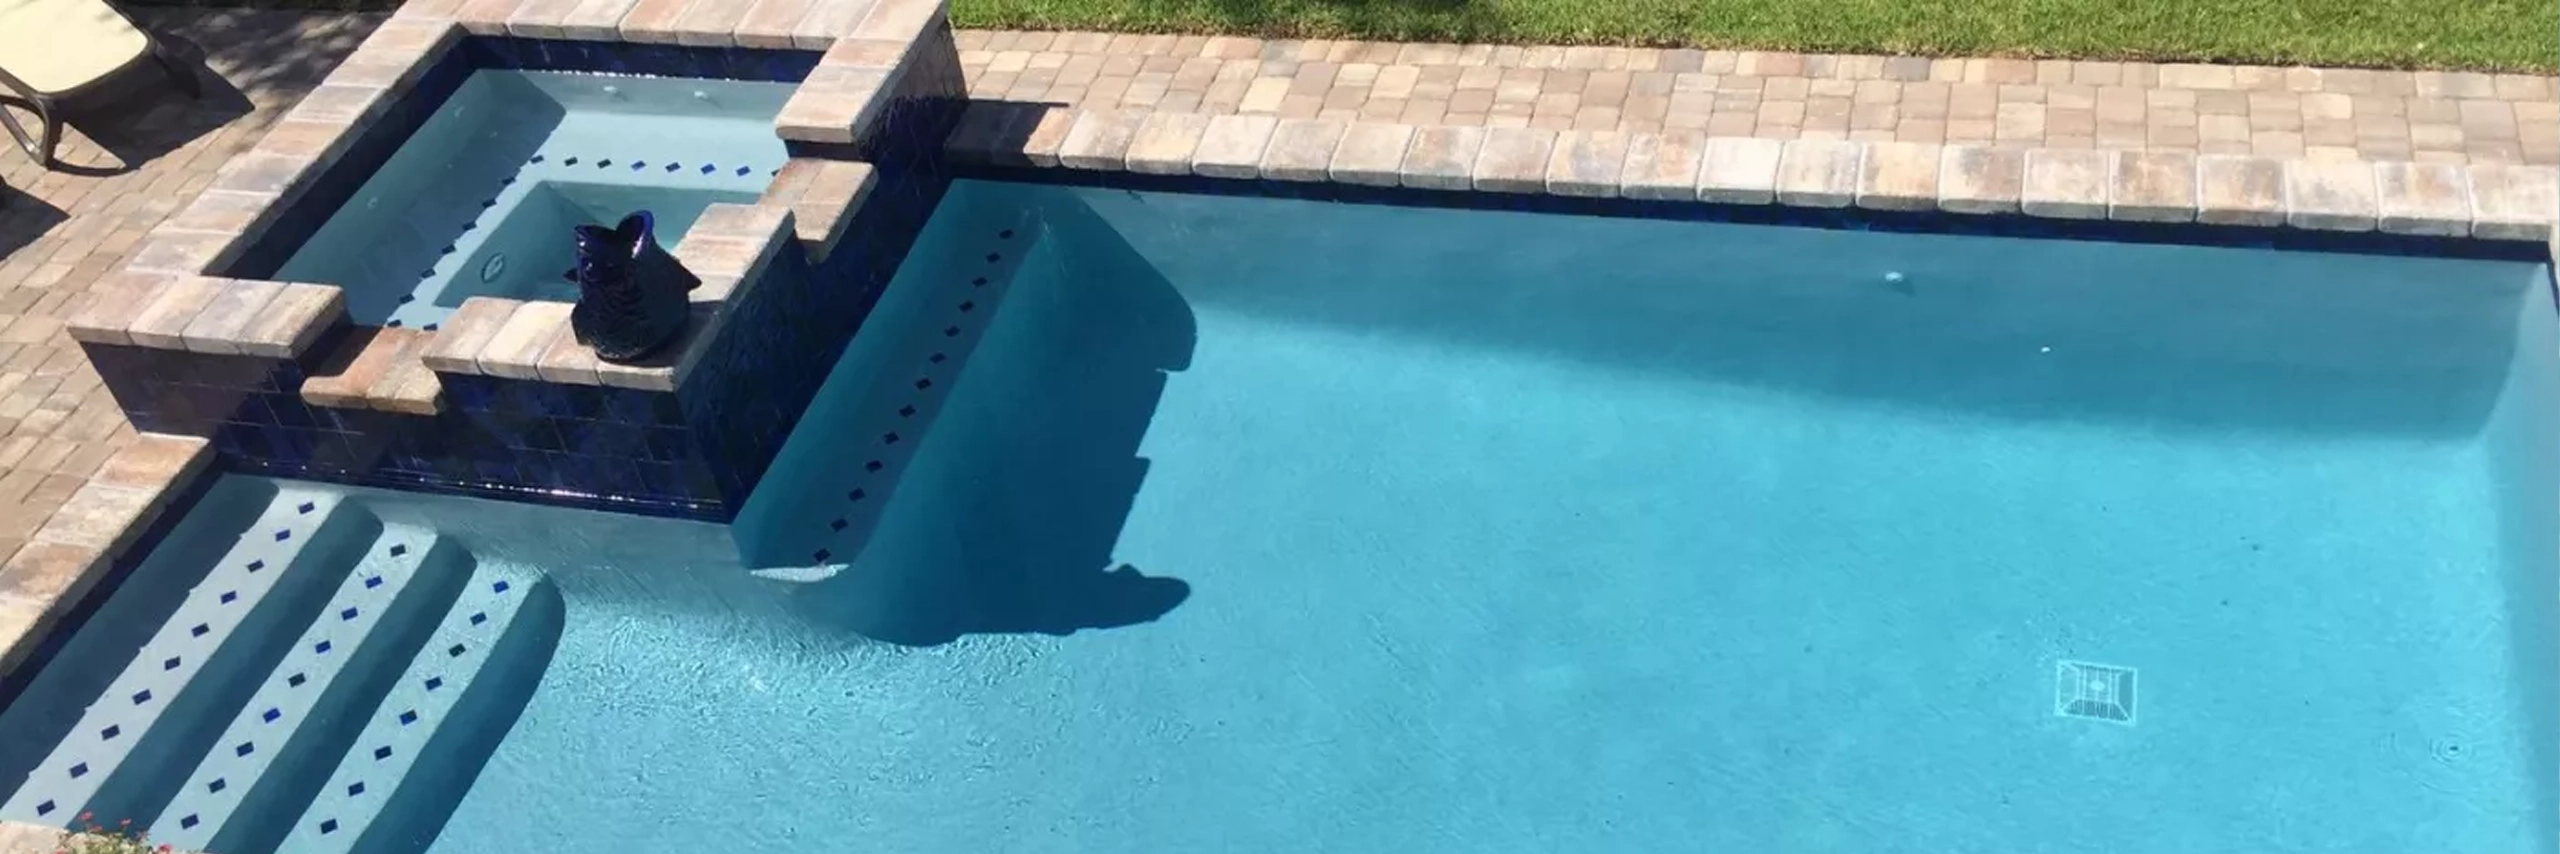 pool renovation and remodeling